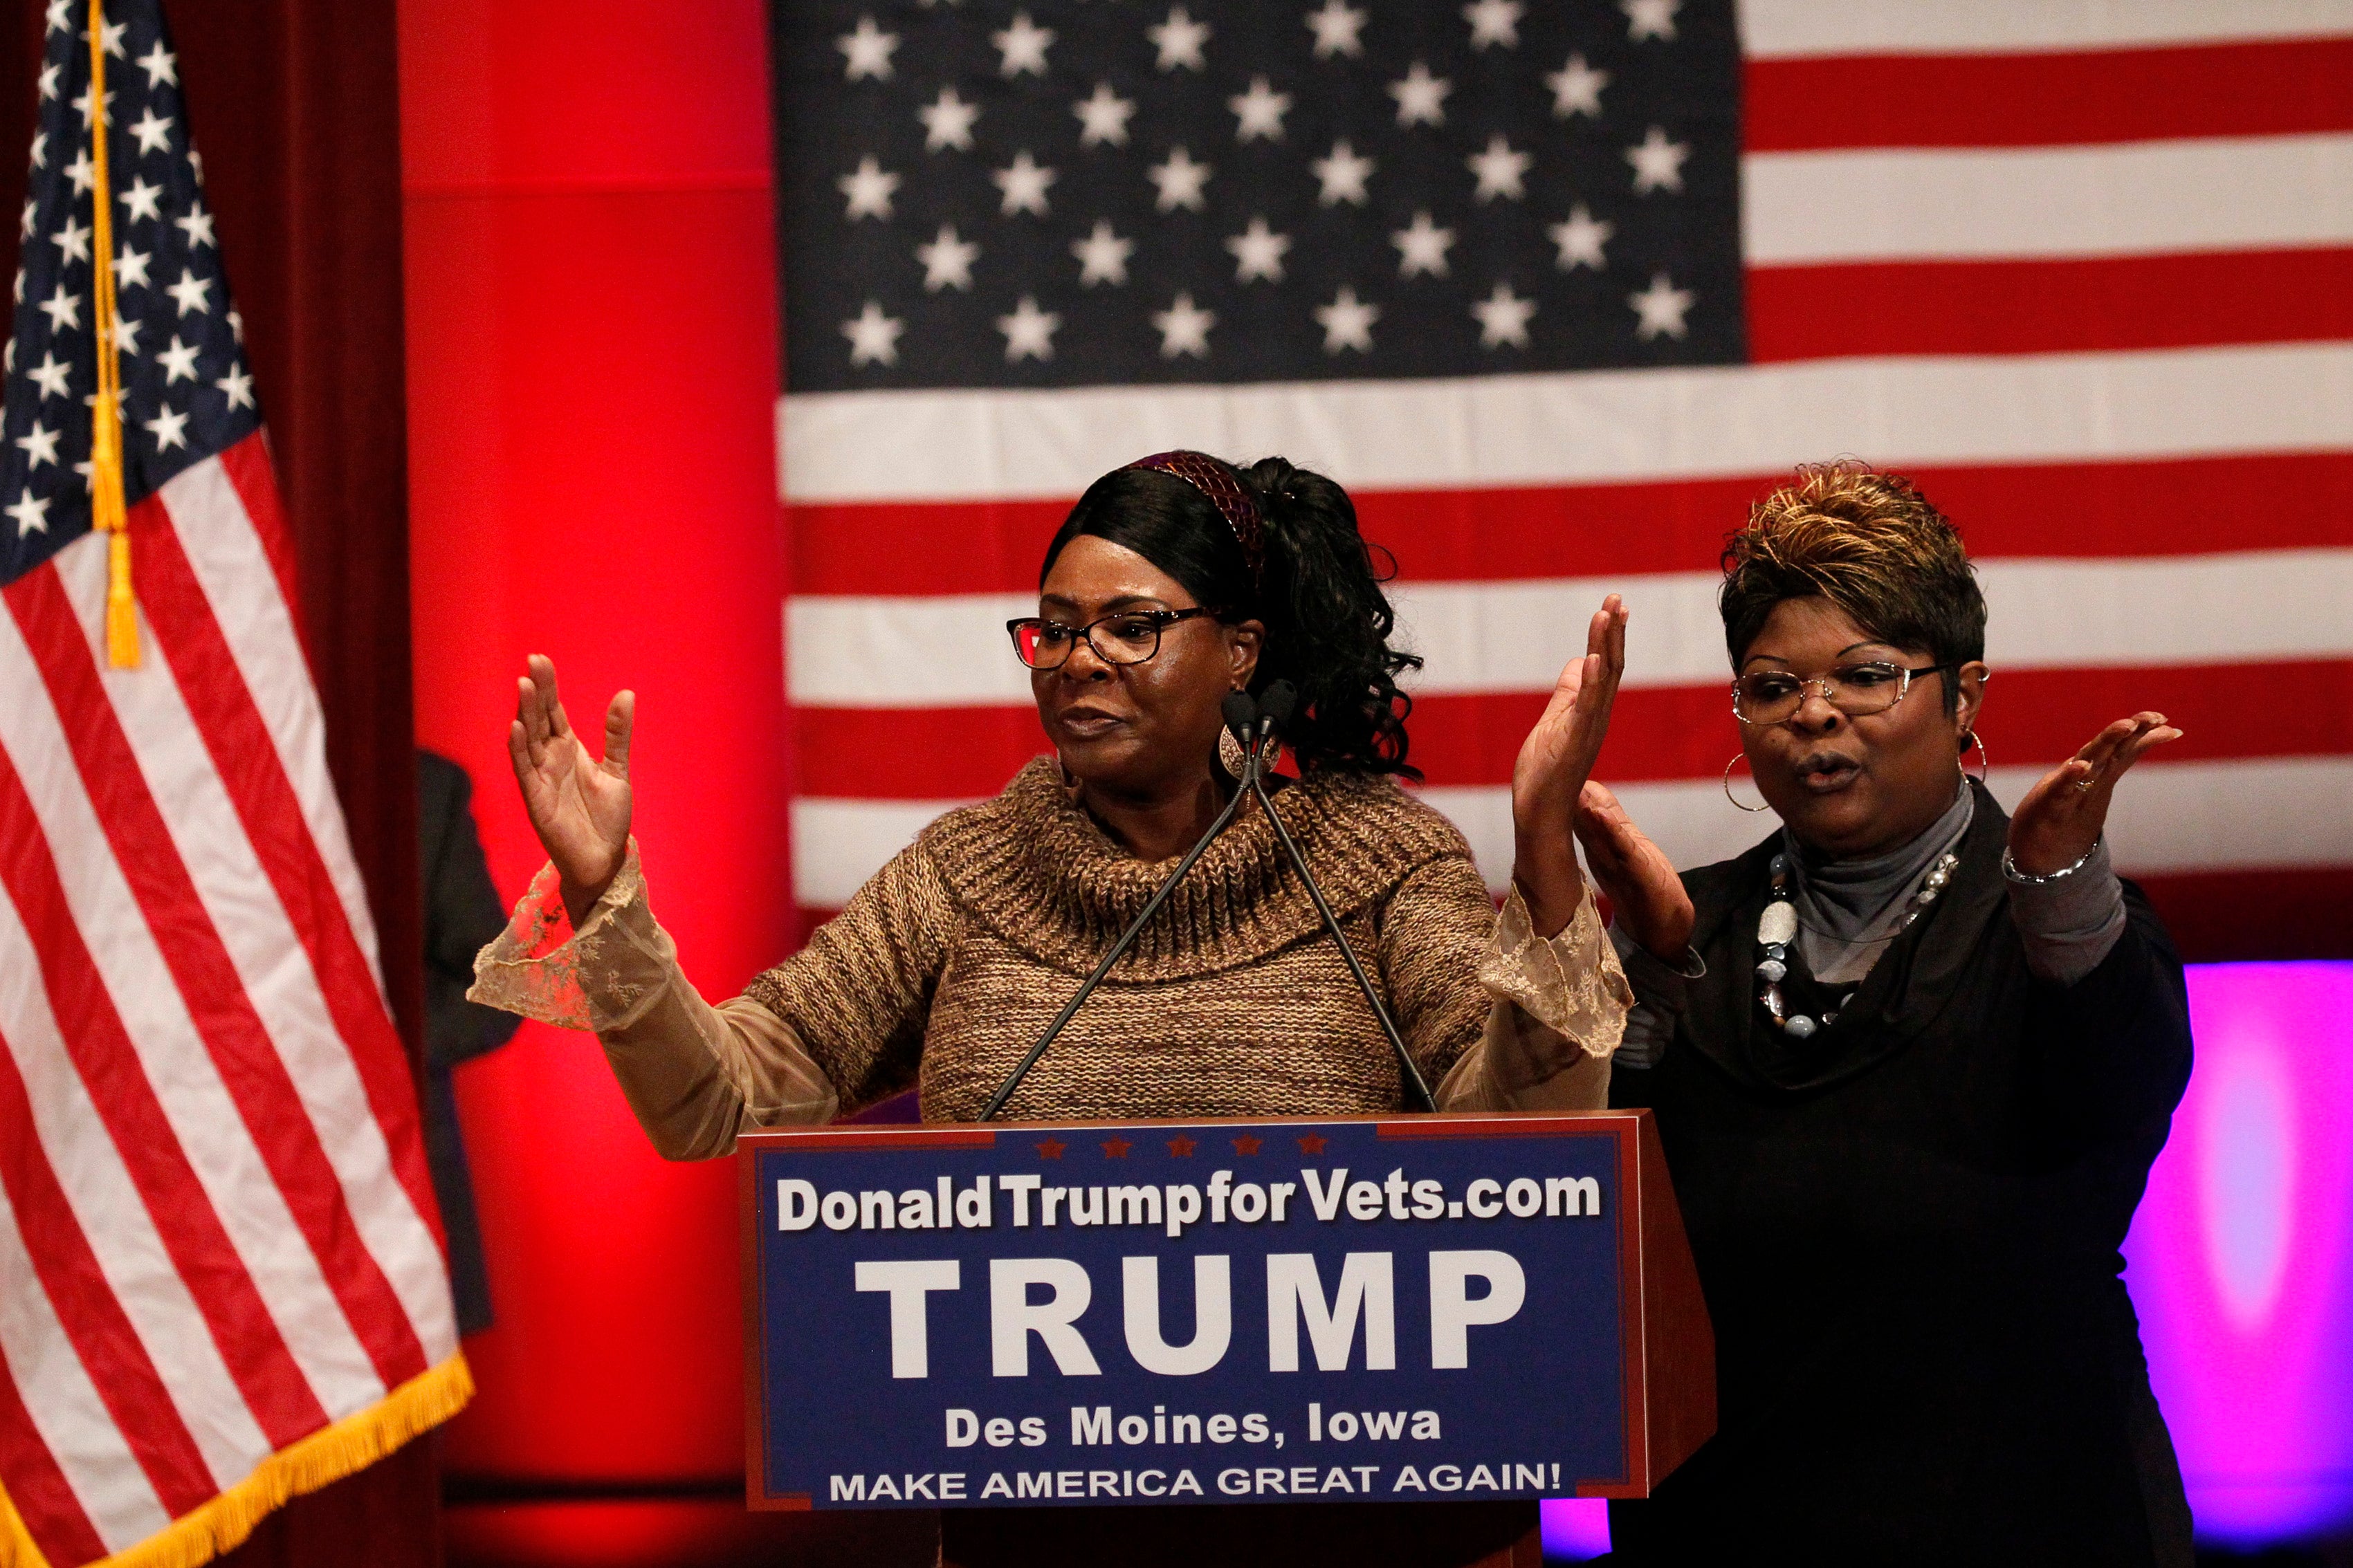 STATESYoutube stars "Diamond & Silk" speak in support of Republican presidential candidate Donald Trump onstage beforeTrump's speech at a veterans rally in Des Moines, Iowa.